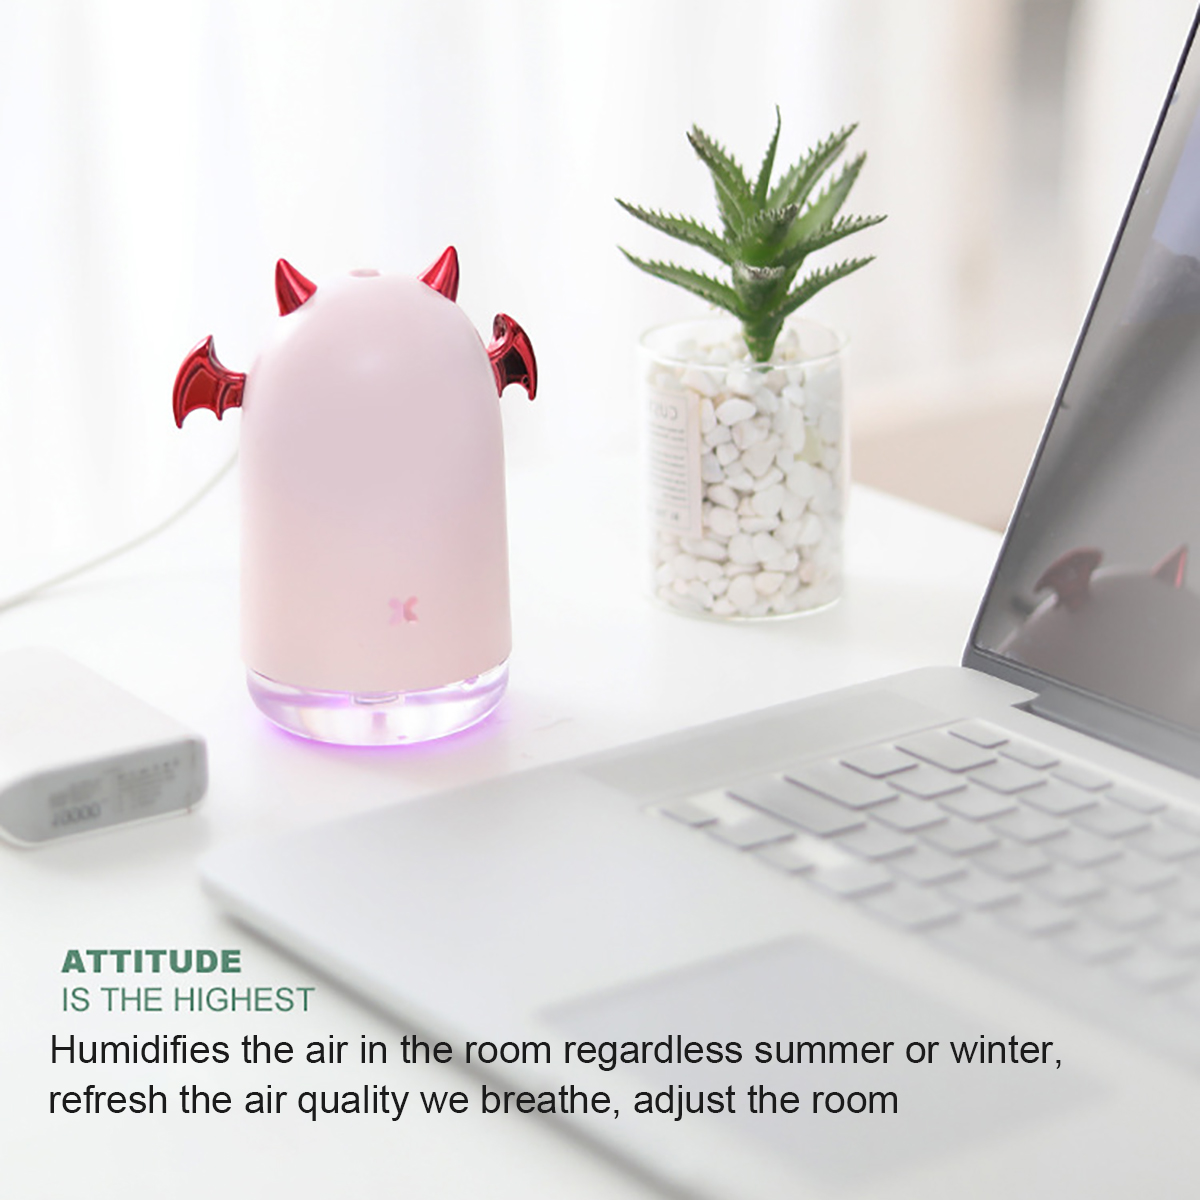 7-LED-Humidifier-USB-Purifier-Mist-Aroma-Essential-Oil-Diffuser-Halloween-Gift-1651094-5